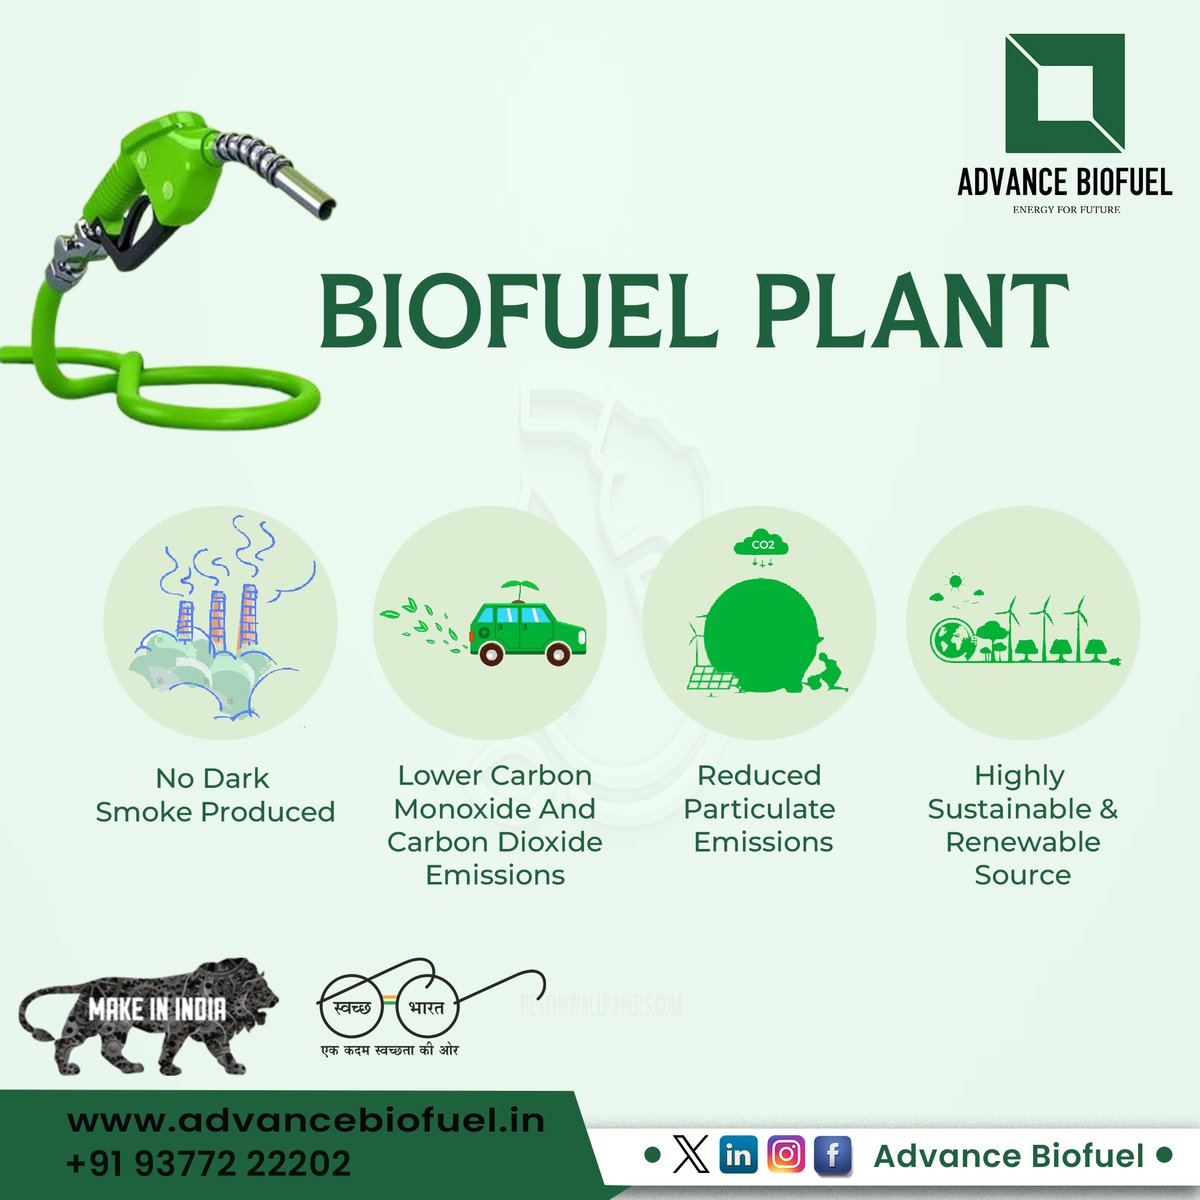 No smoke, no problem! With Advance Biofuel, you get an eco-friendly and sustainable energy solution that's friendly to the environment. It's time to make a difference!

#AdvanceBiofuel #BiofuelplantManufacturer #GreenTechnology #EcoFriendlyFuel #NoDarkSmoke #BiofuelsForChange